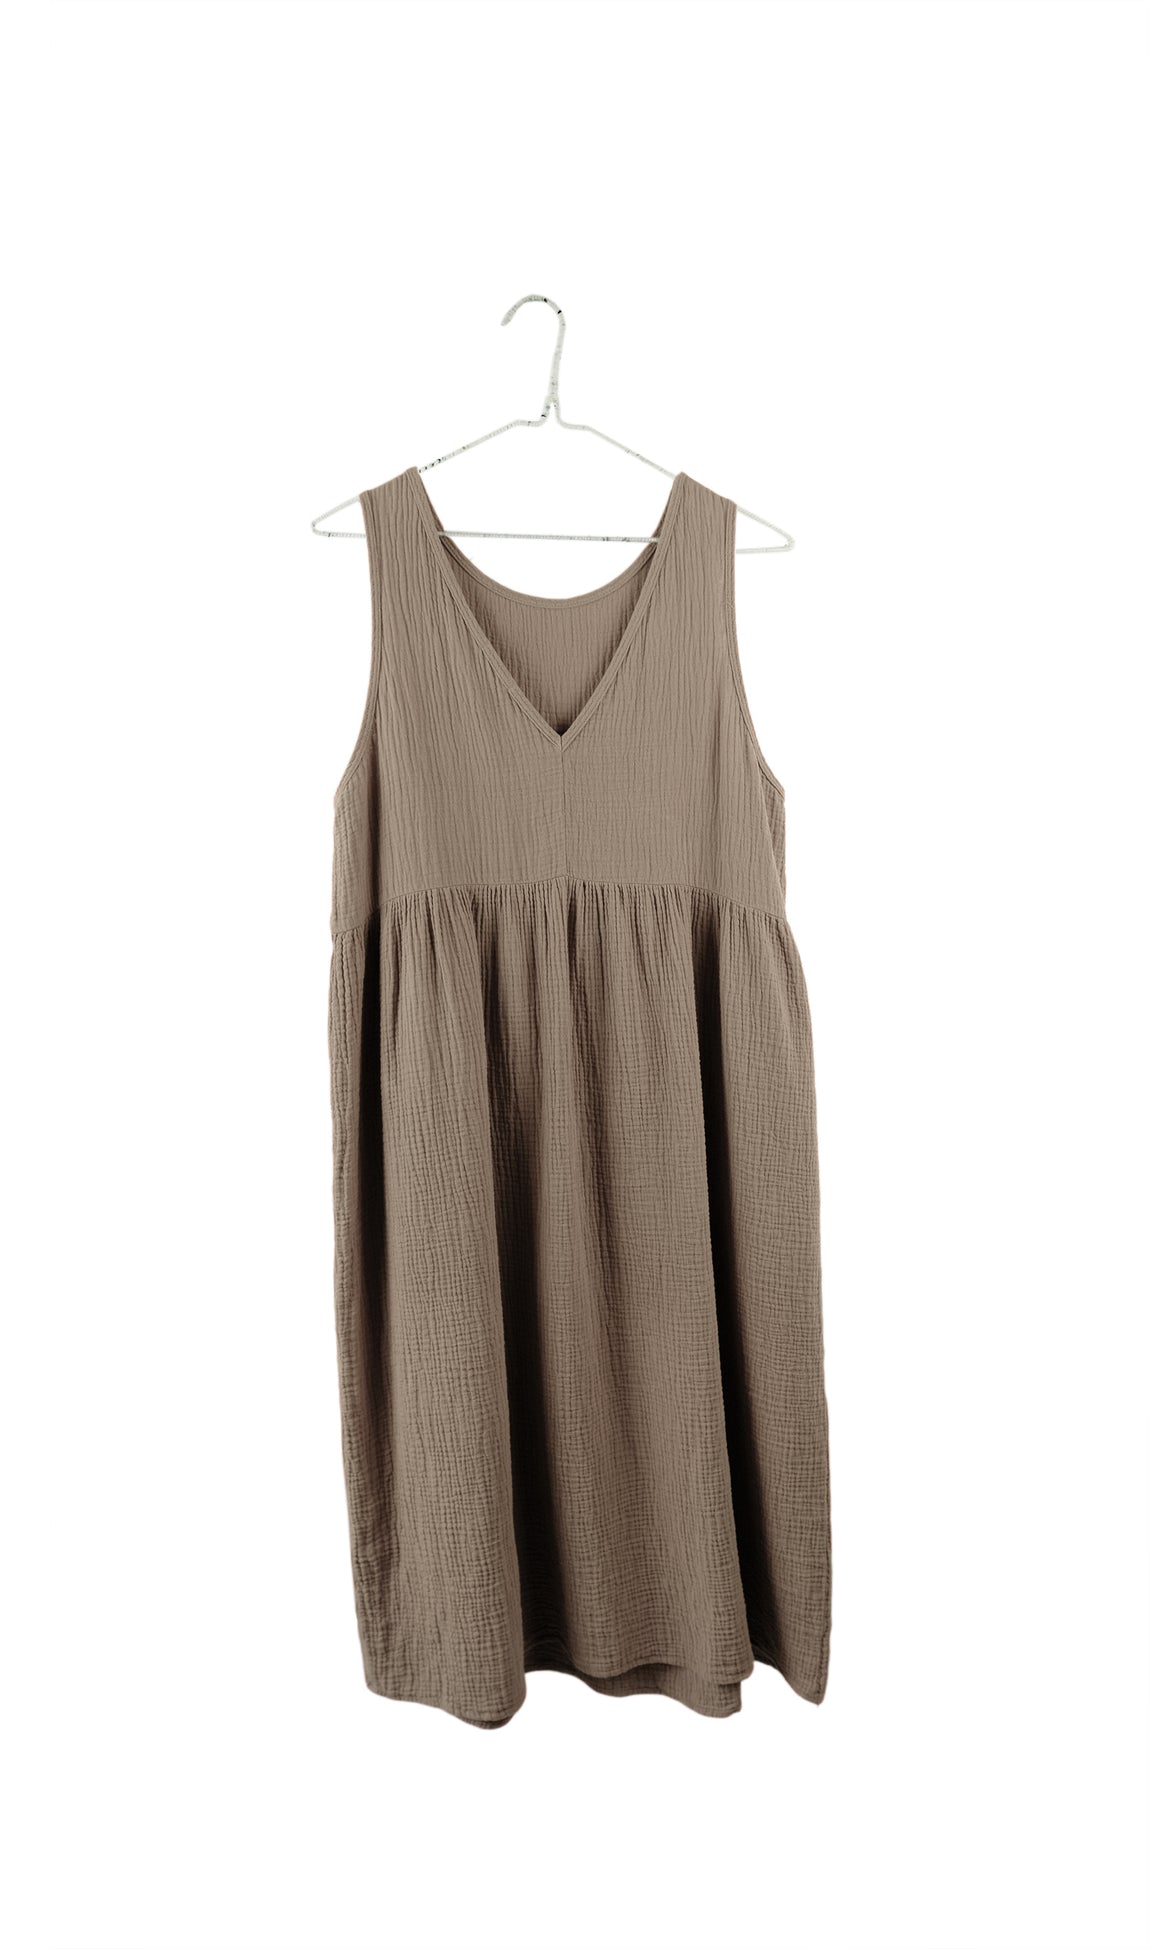 Organic Cotton Gauze Indra Dress in Melon Locally Made in Los